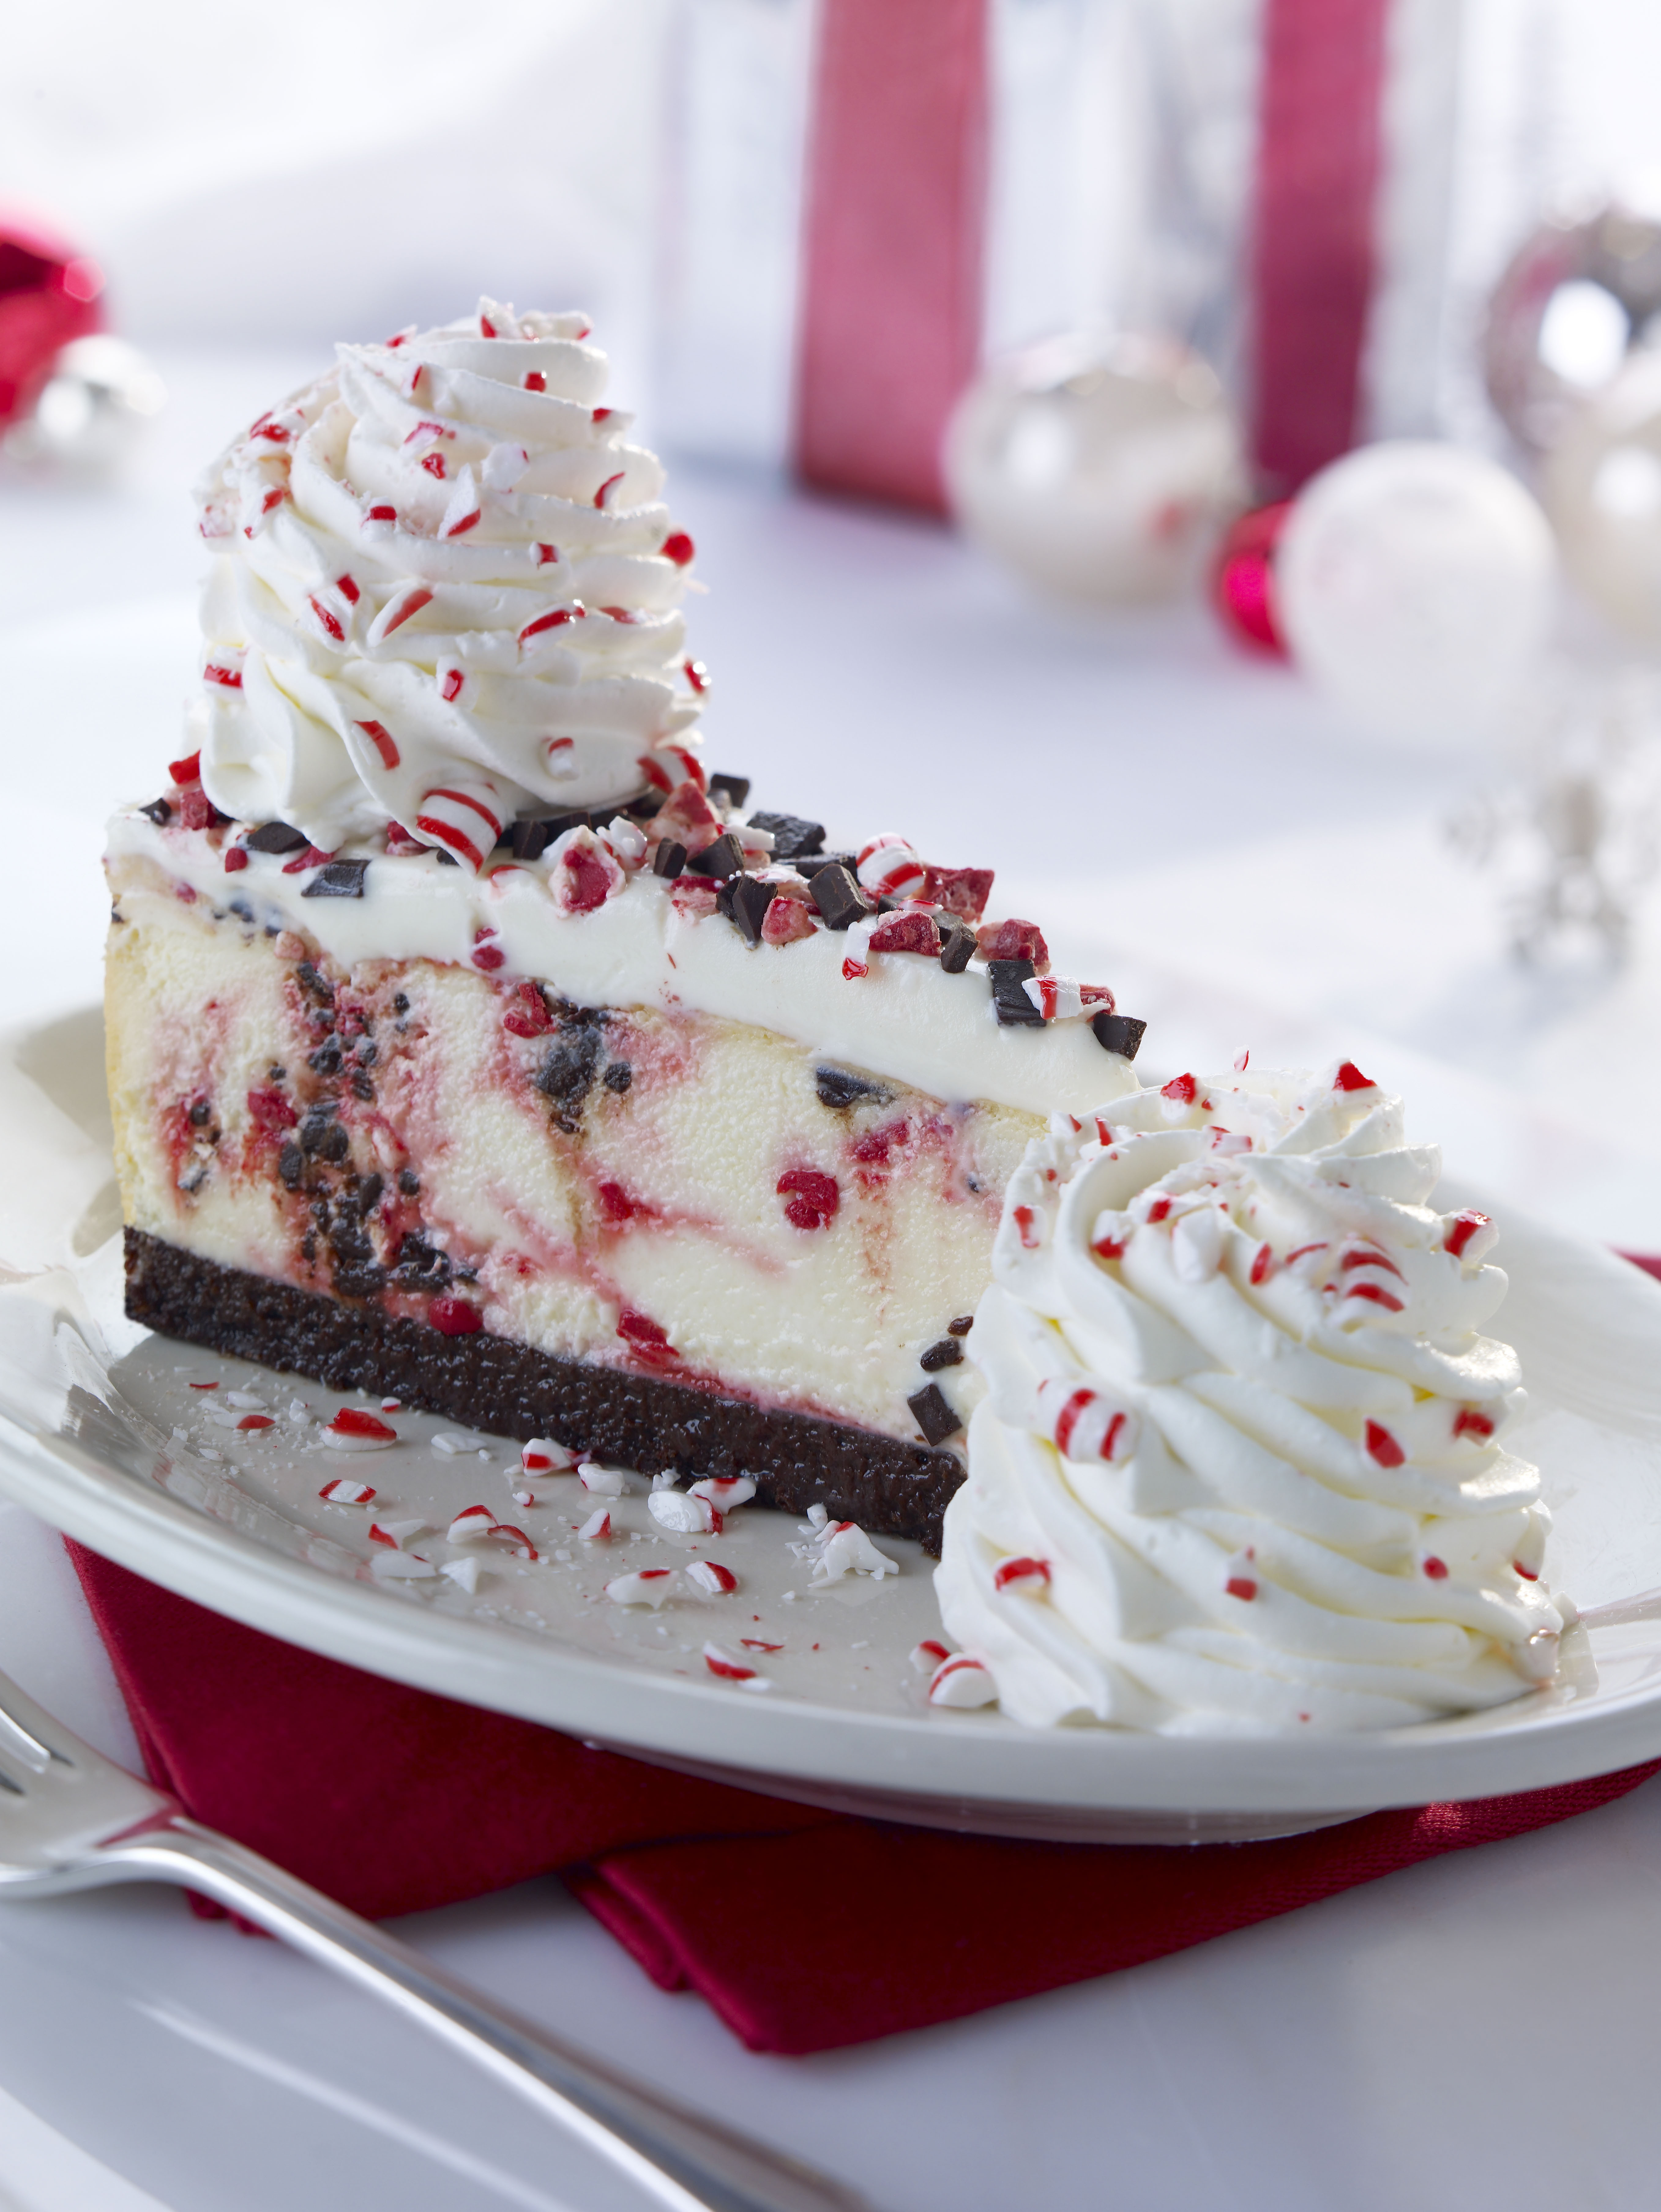 The Cheesecake Factory S Peppermint Bark Cheesecake And Slice Of Joy Gift Card Offer Are Back For The Holidays Business Wire